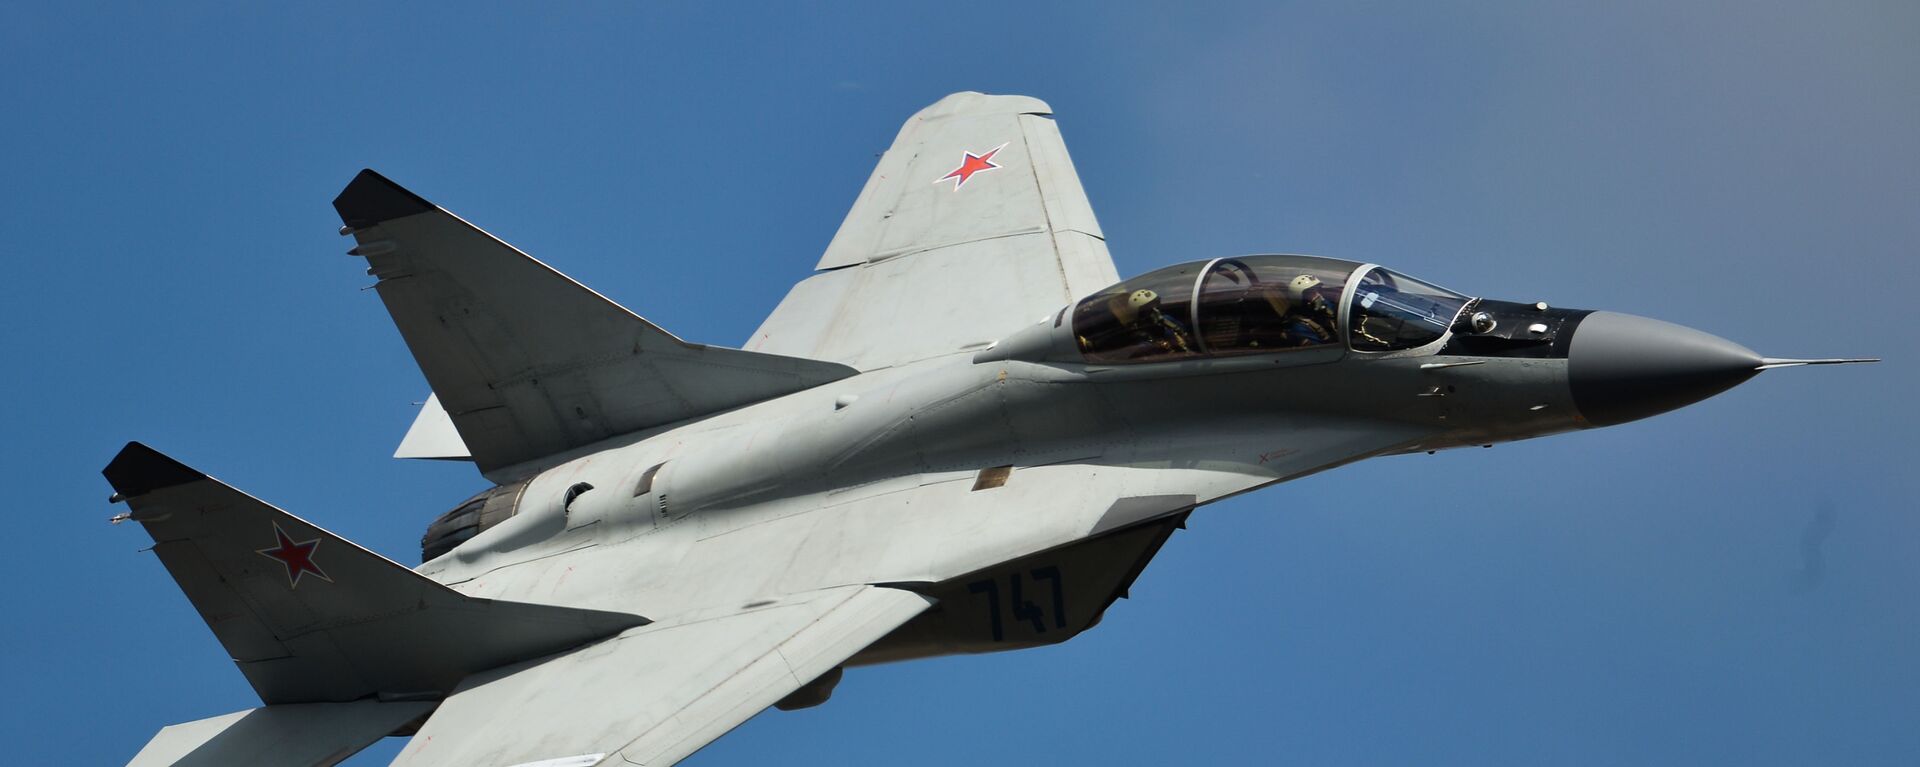 An MiG-35 jet performs a demo flight at the MAKS 2015 International Aviation and Space Salon in Zhukovsky outside Moscow. - Sputnik International, 1920, 12.08.2023